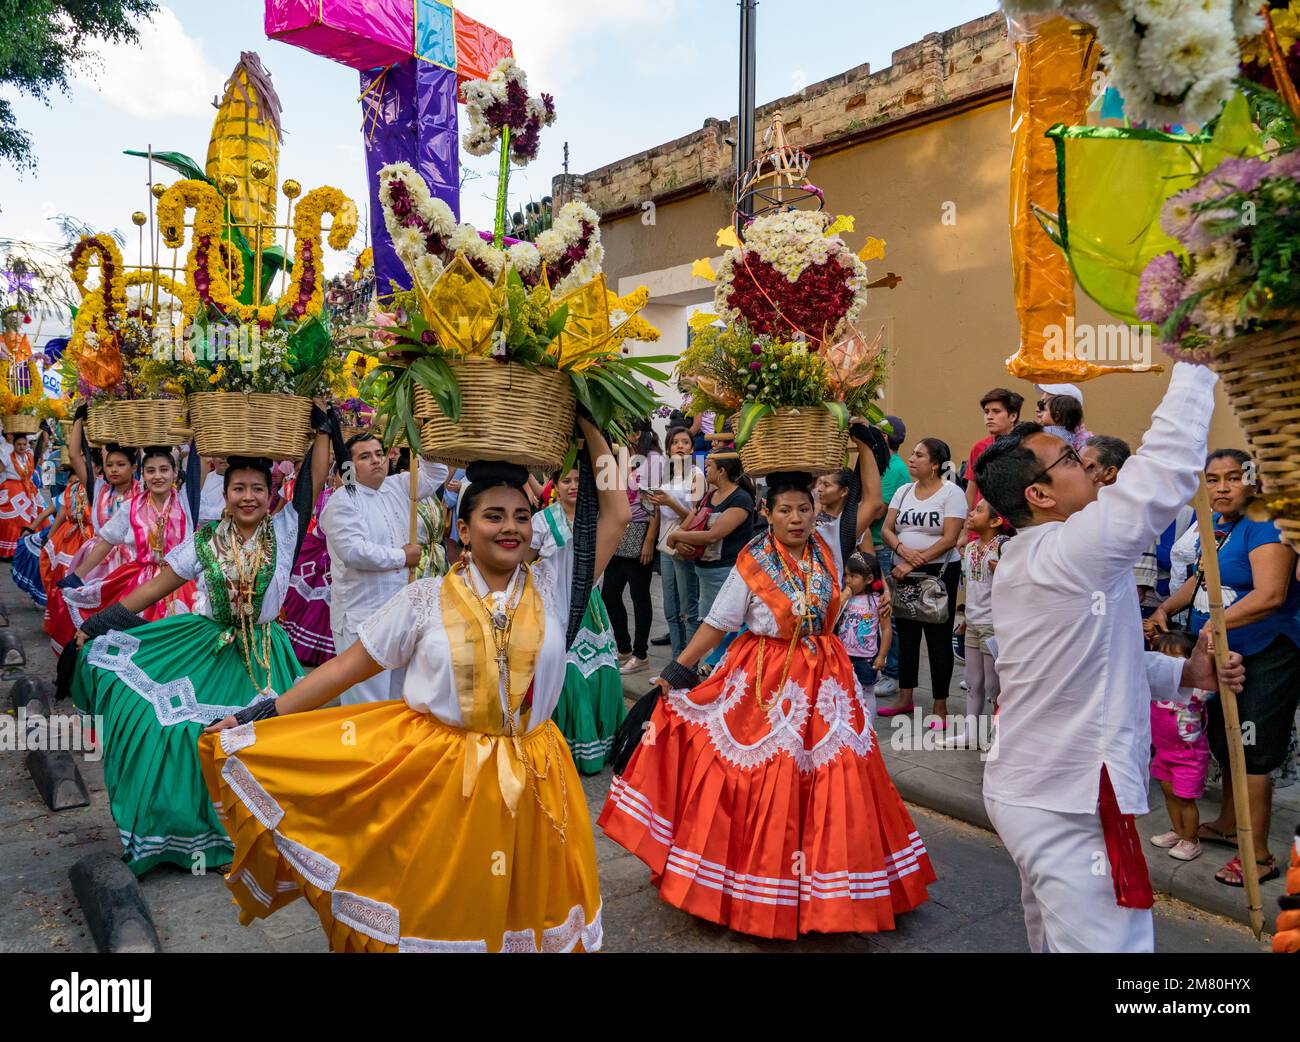 Chinas Oaxaquenas dancers with decorated flower baskets on their heads at the Guelaguetza festival in Oaxaca, Mexico. Stock Photo